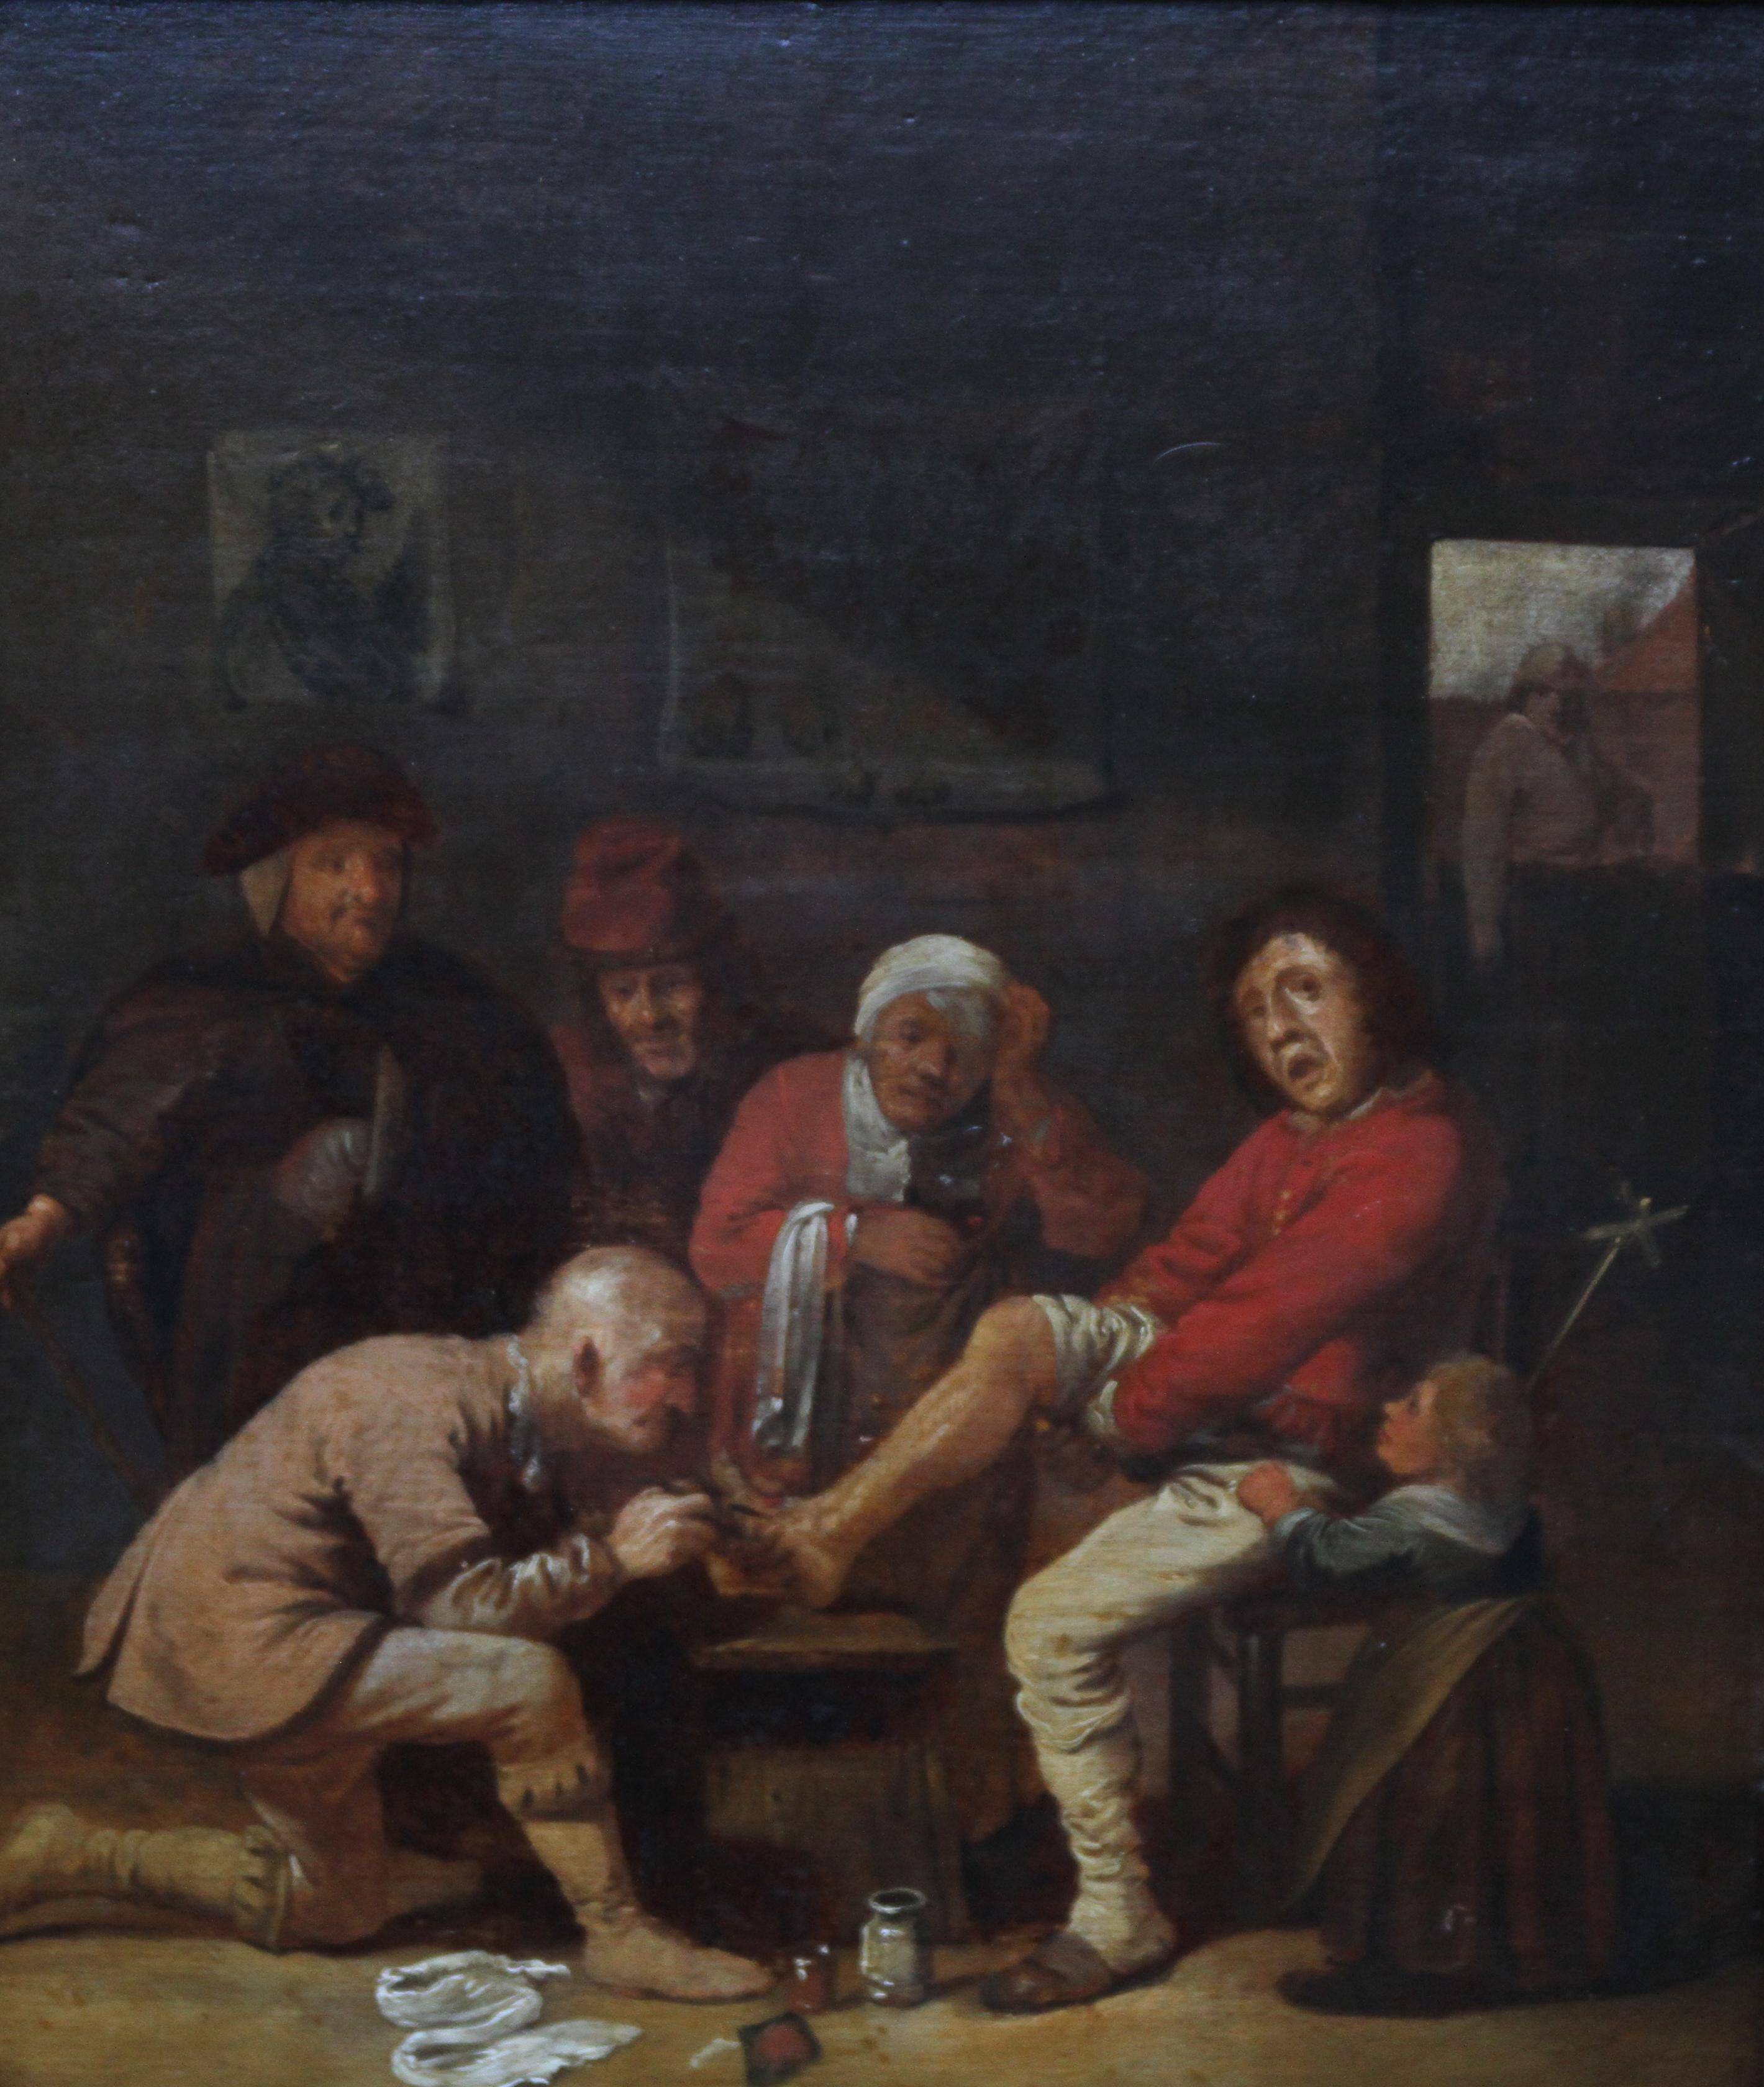 A Surgeon Attending to his Patient's Foot - Dutch 17thC Old Master oil painting - Painting by David Teniers the Younger